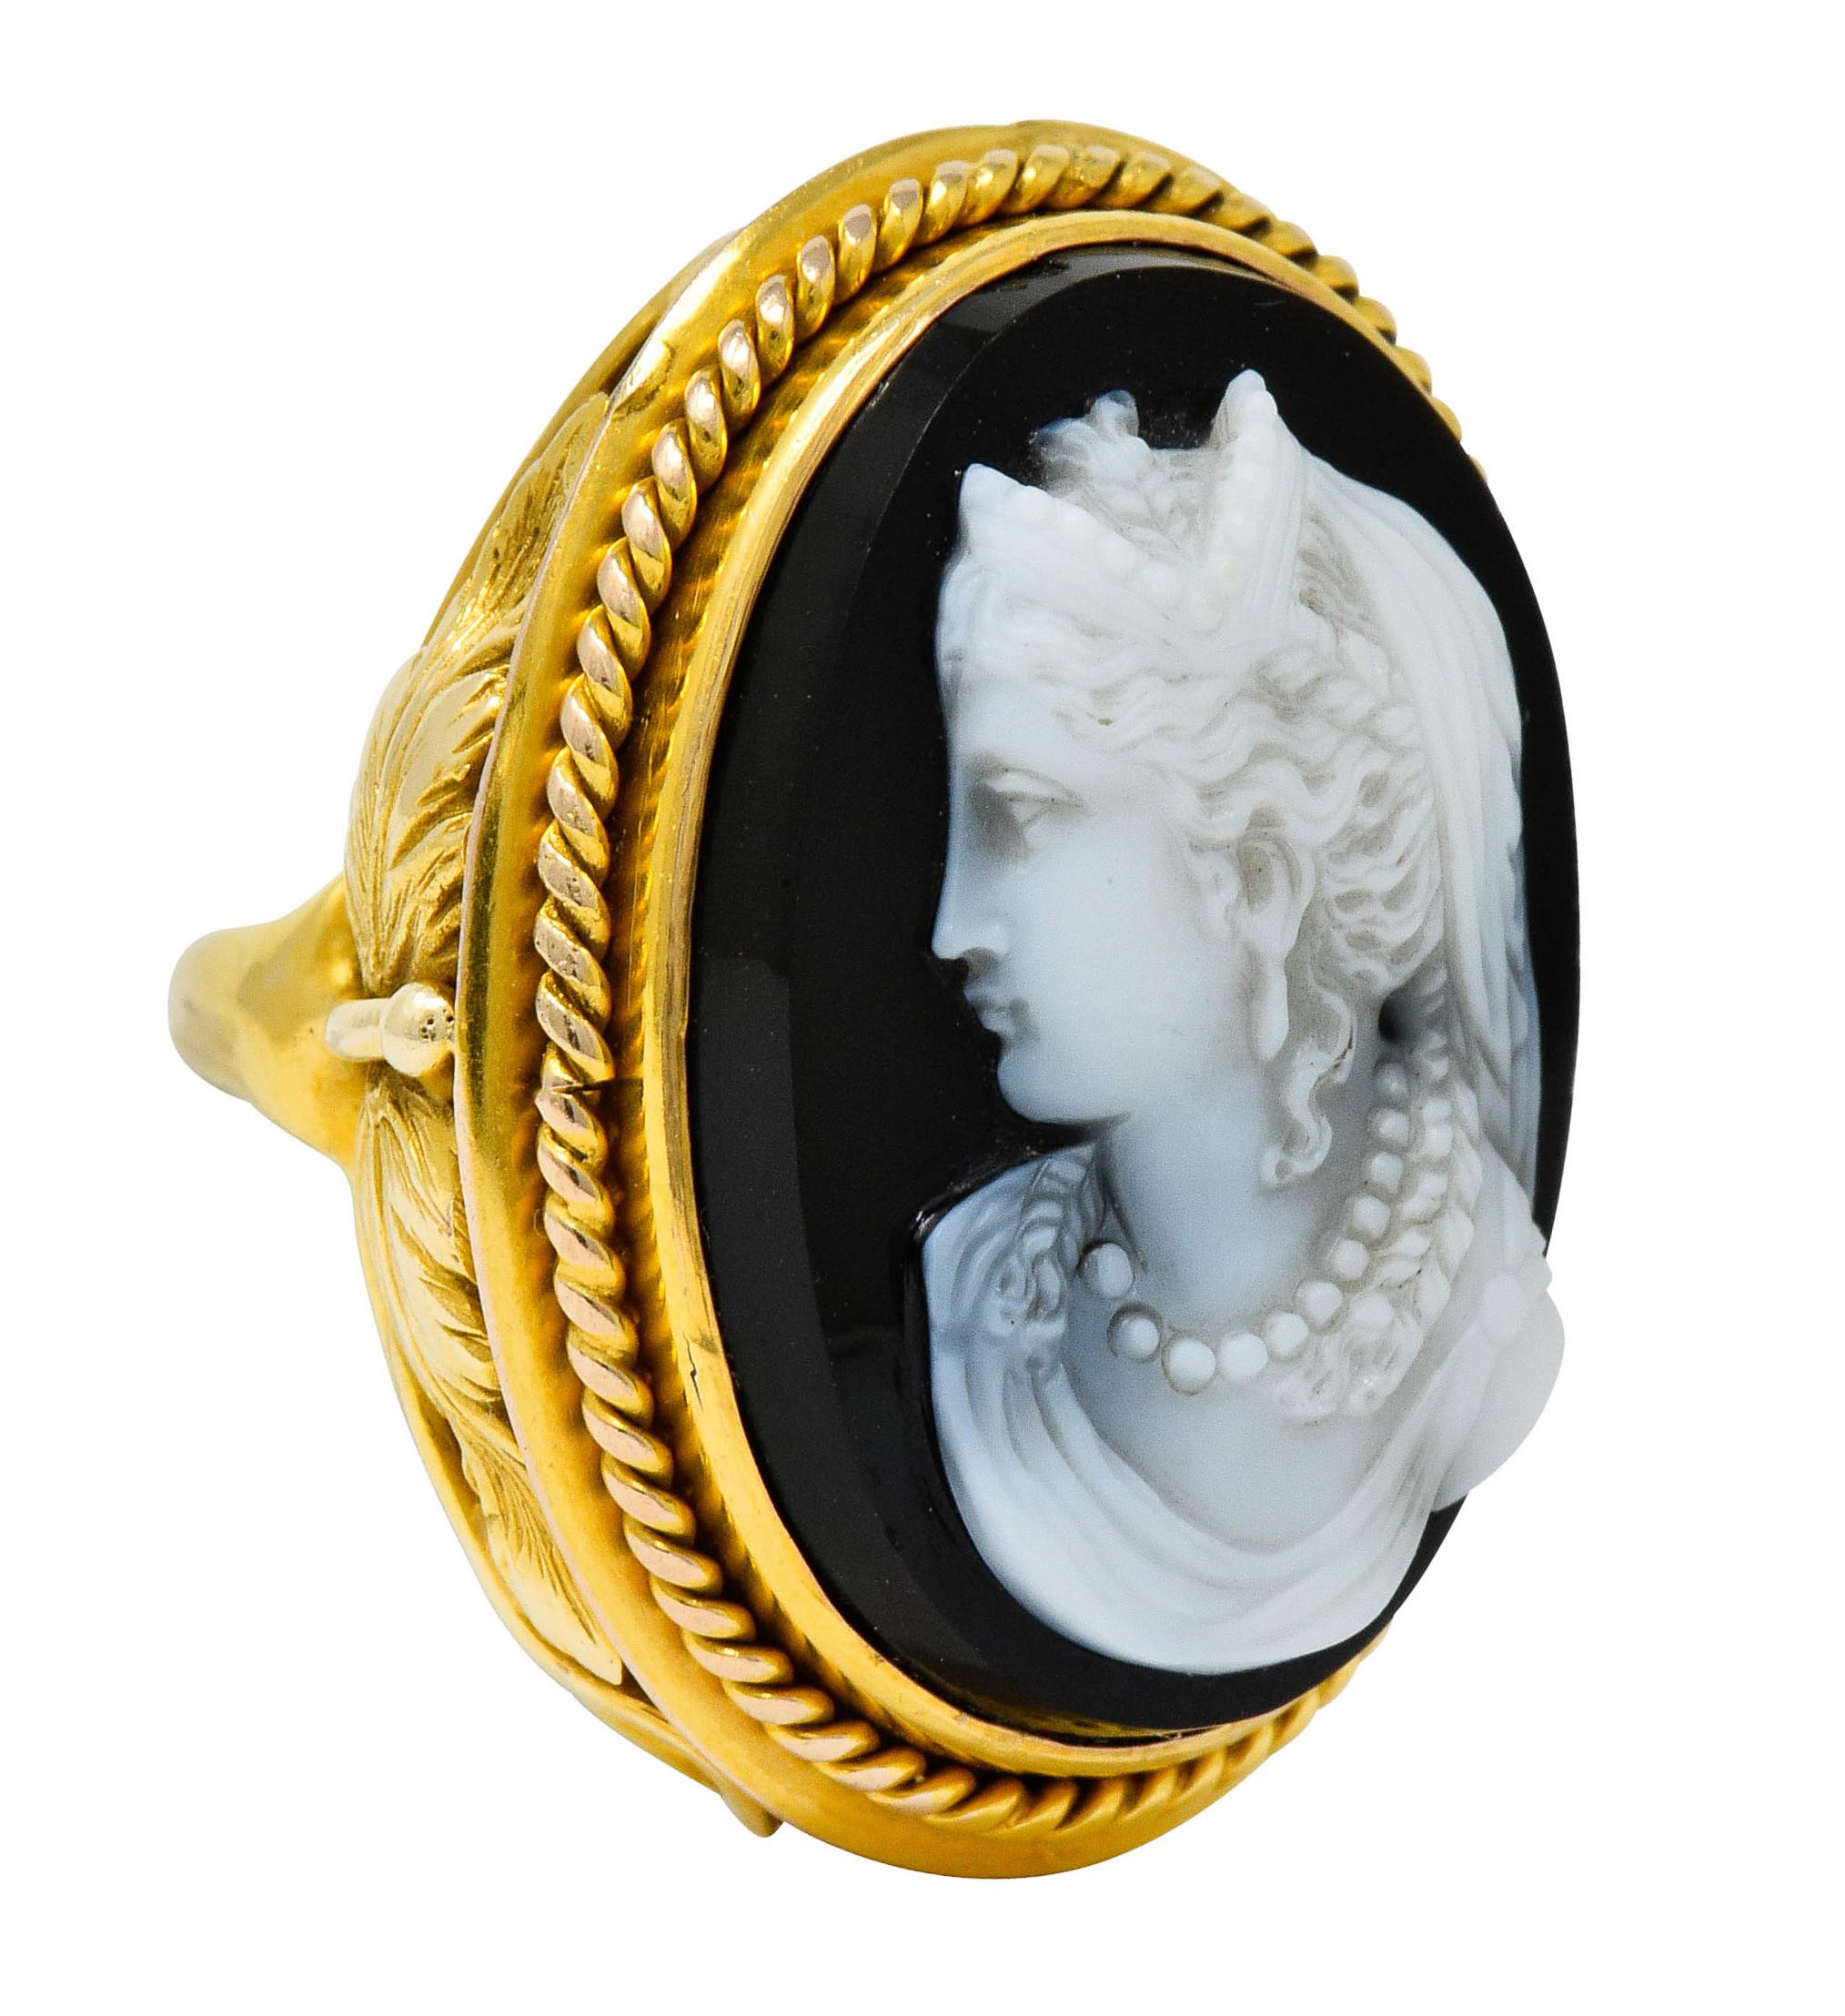 Centering an oval tablet of banded onyx agate measuring approximately 23.2 x 16.7 mm

Depicting an elegantly dressed woman deeply carved in matte white with a glossy black background

Bezel set in a polished gold surround with a twisted rope motif